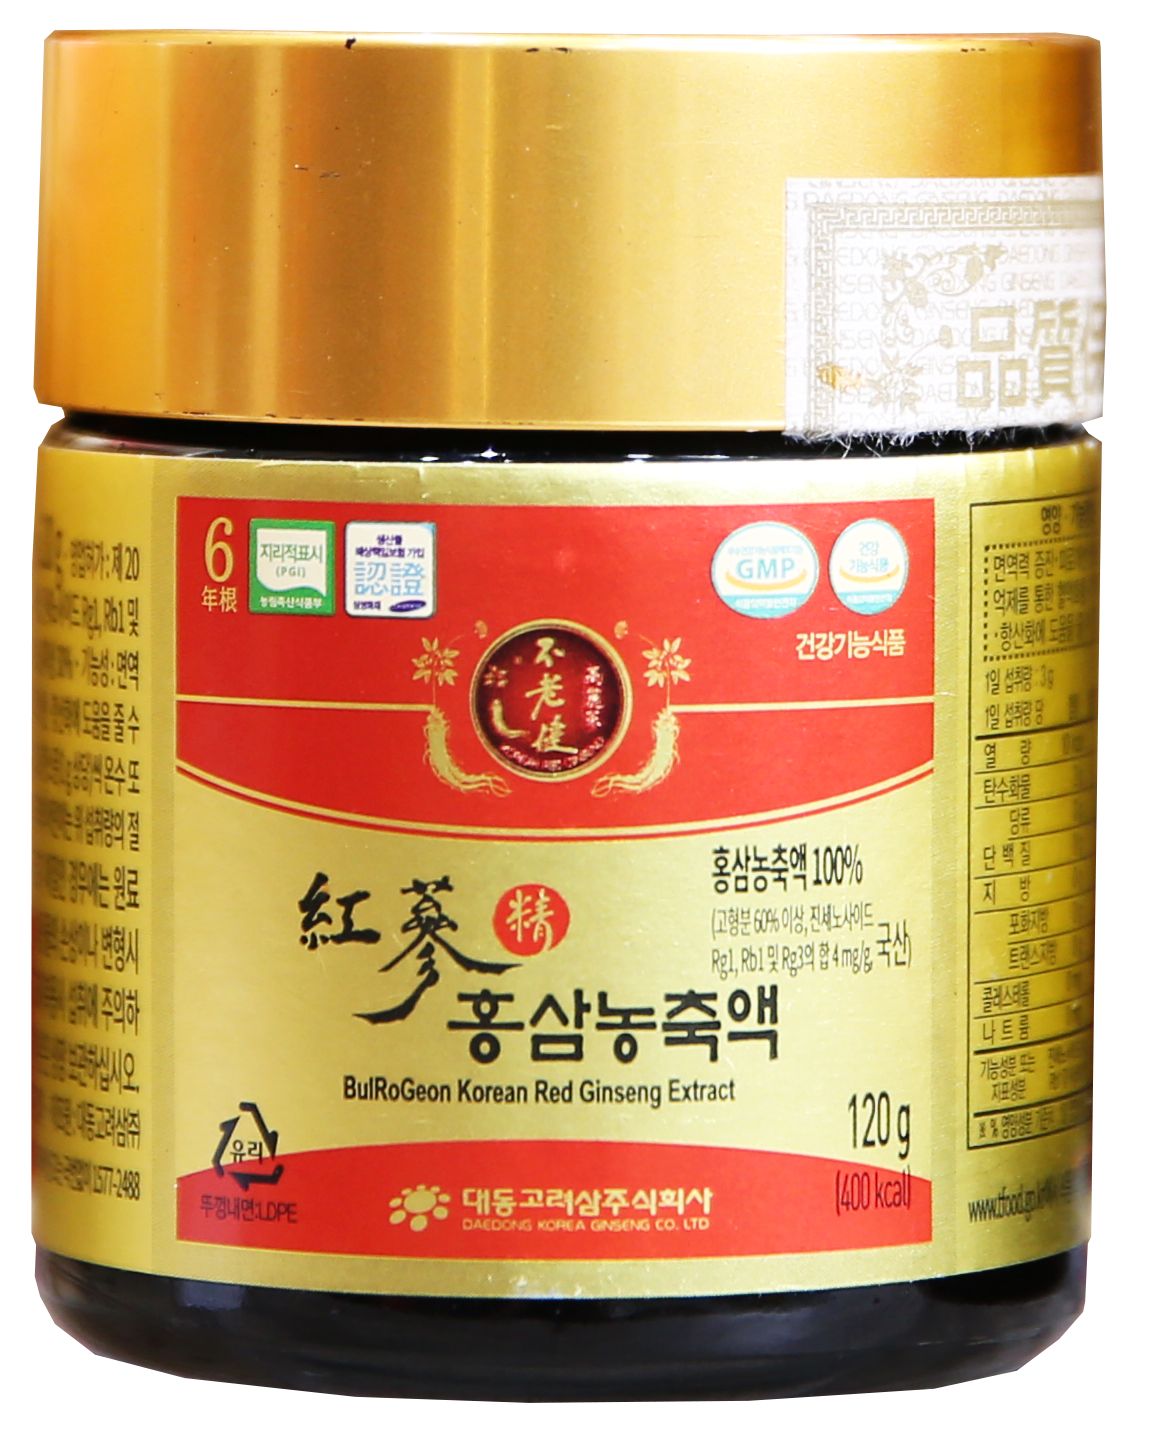 Korean Red Ginseng Extract 120g